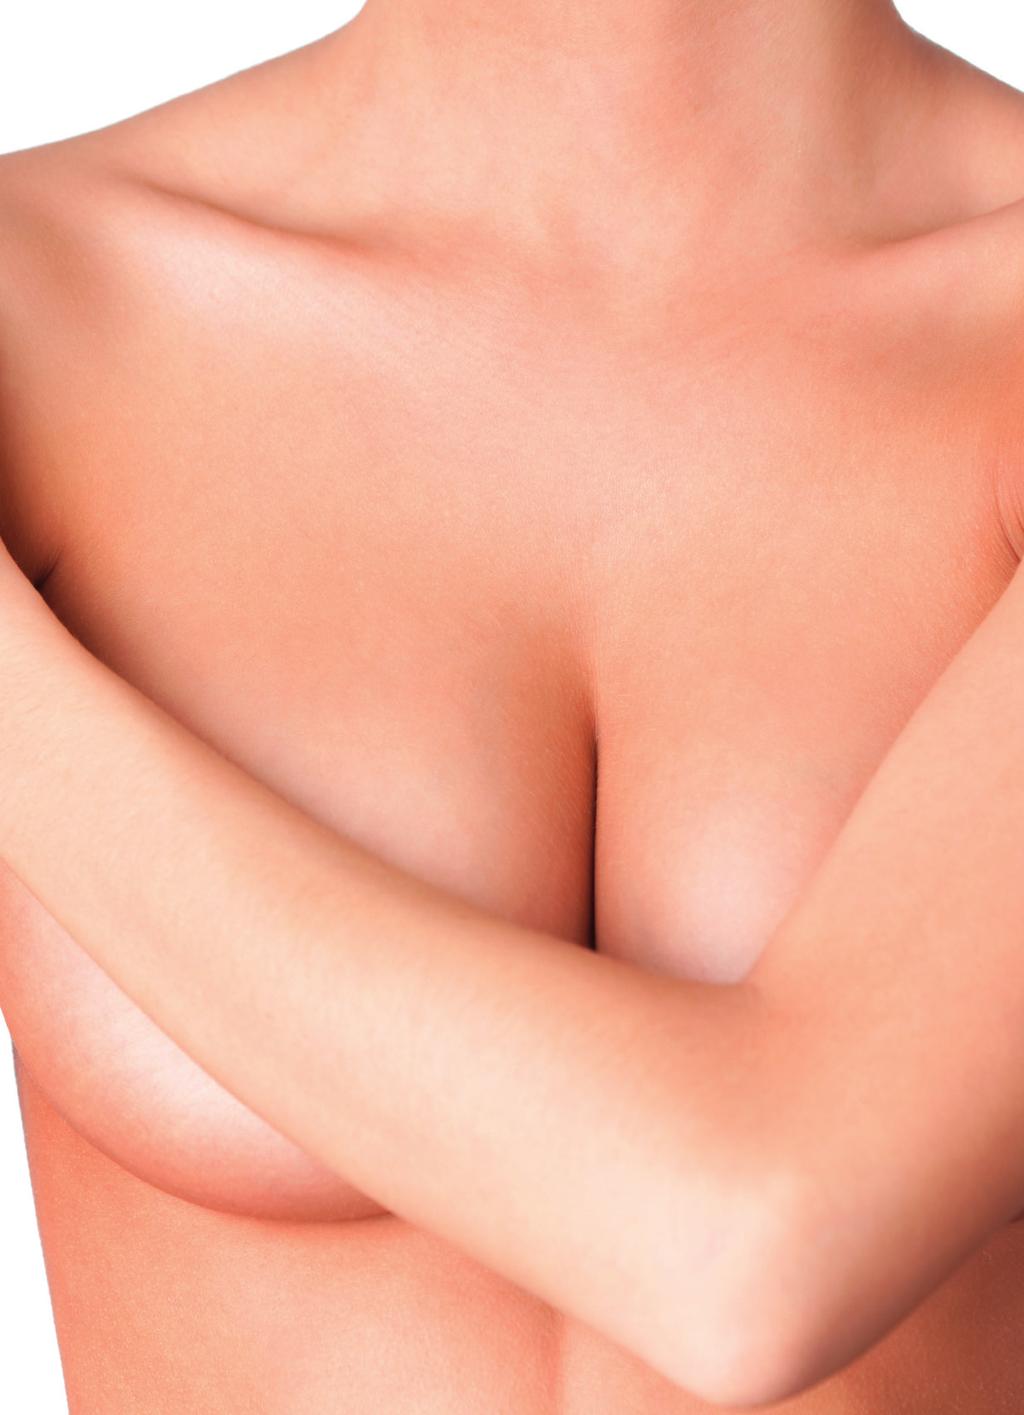 The procedure Breast augmentation is usually an outpatient procedure, though some can elect to stay overnight.